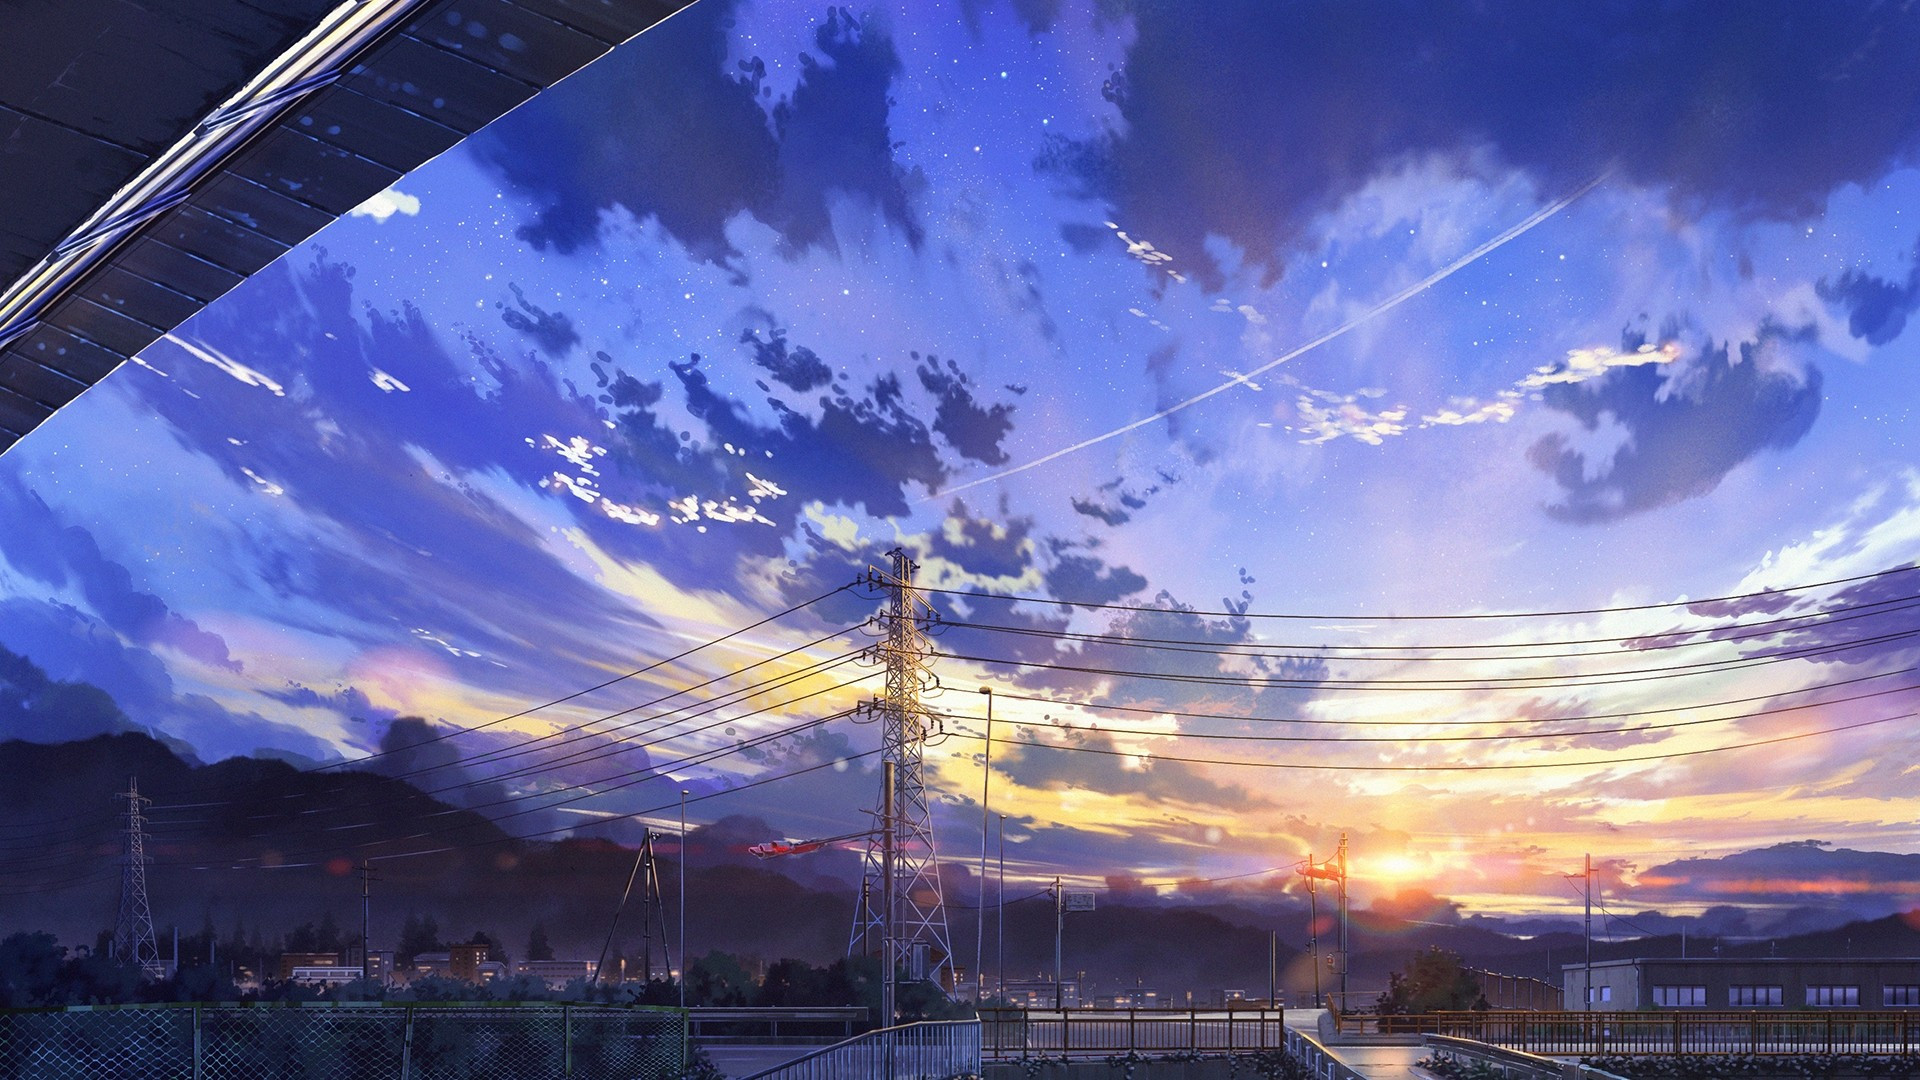 Scenery, landscape and drawing anime #991938 on animesher.com